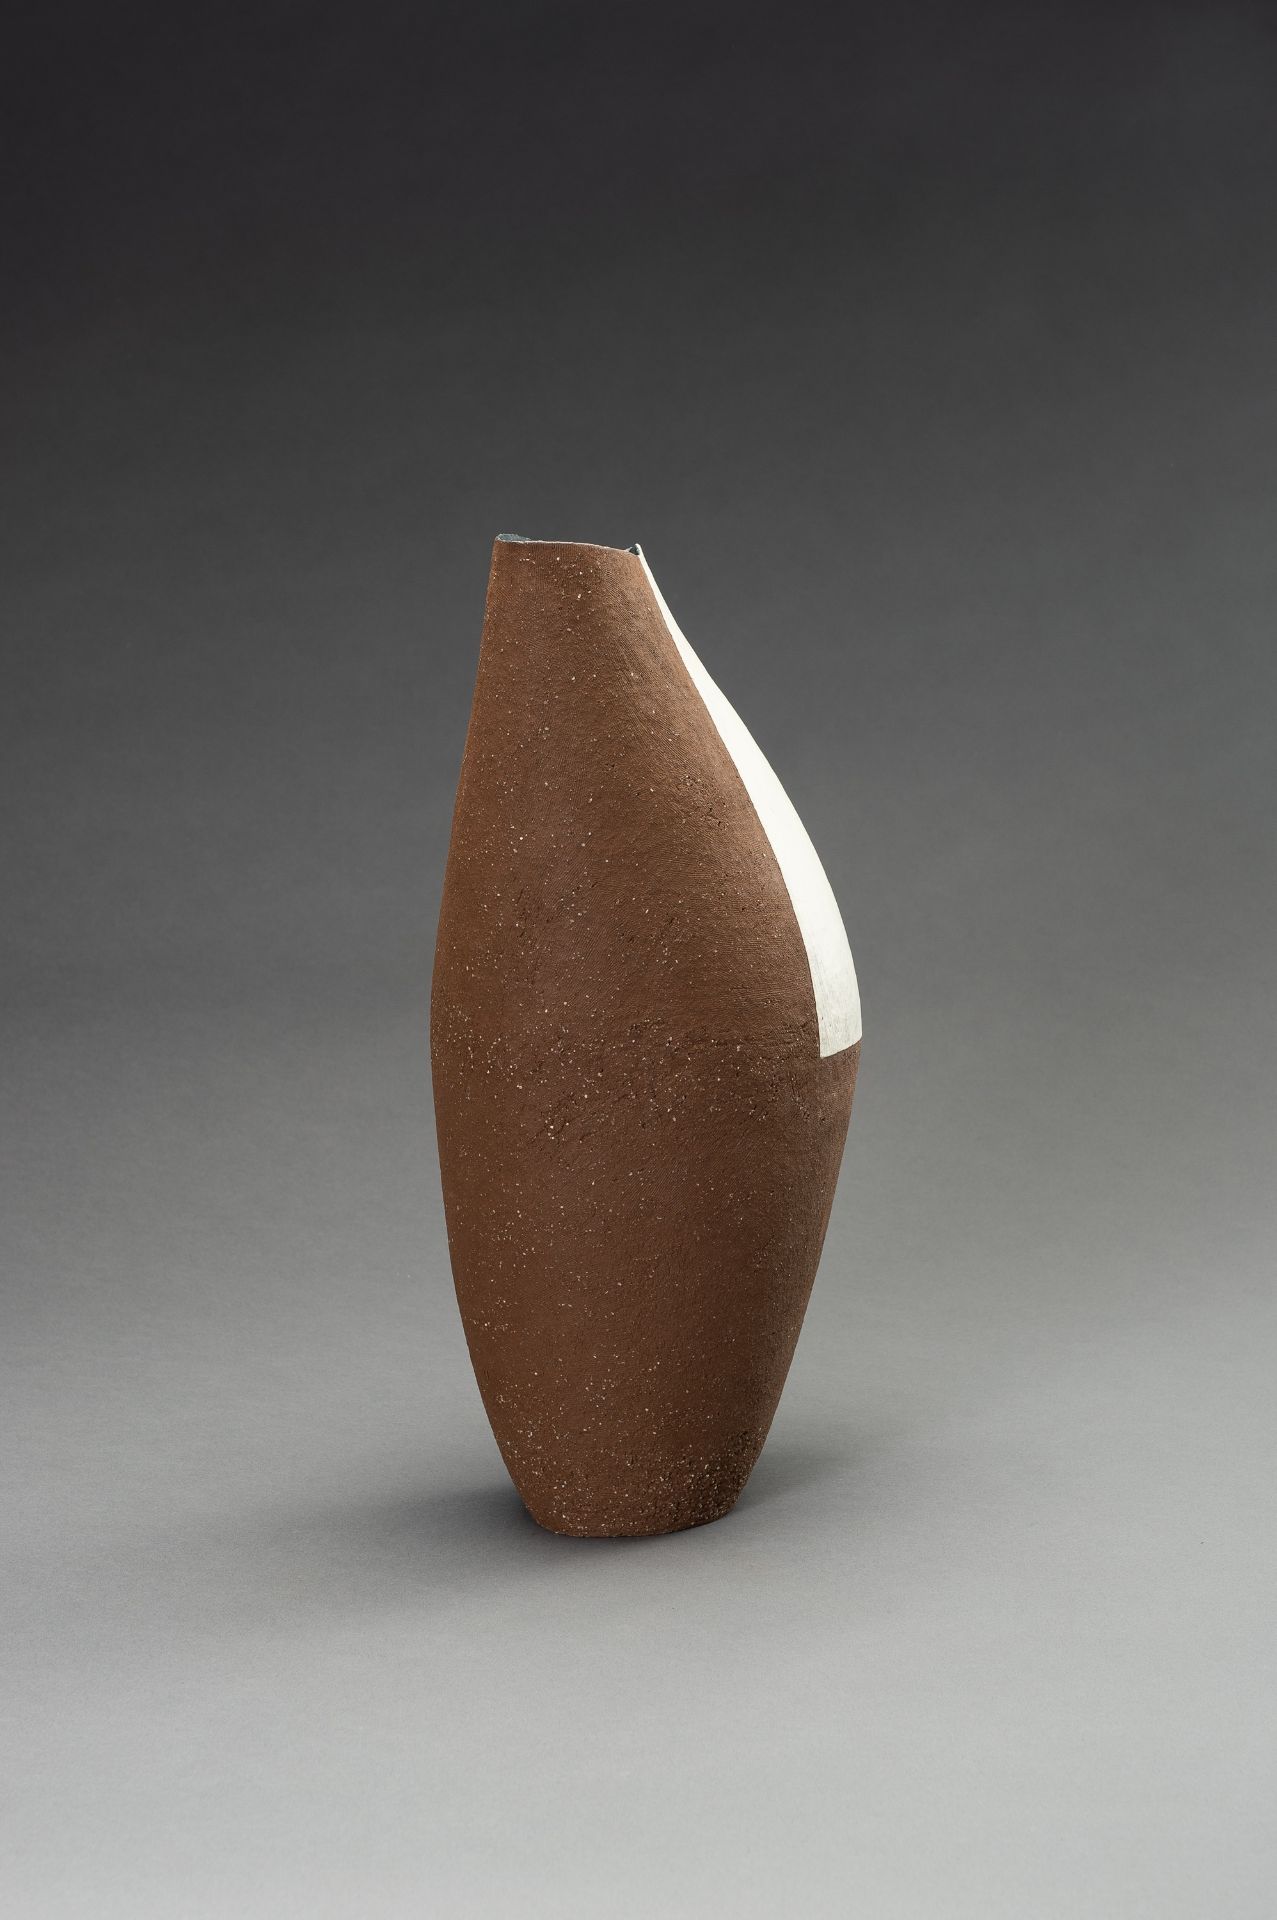 MASA TOSHI: A CONTEMPORARY LACQUERED CERAMIC VASE - Image 9 of 11